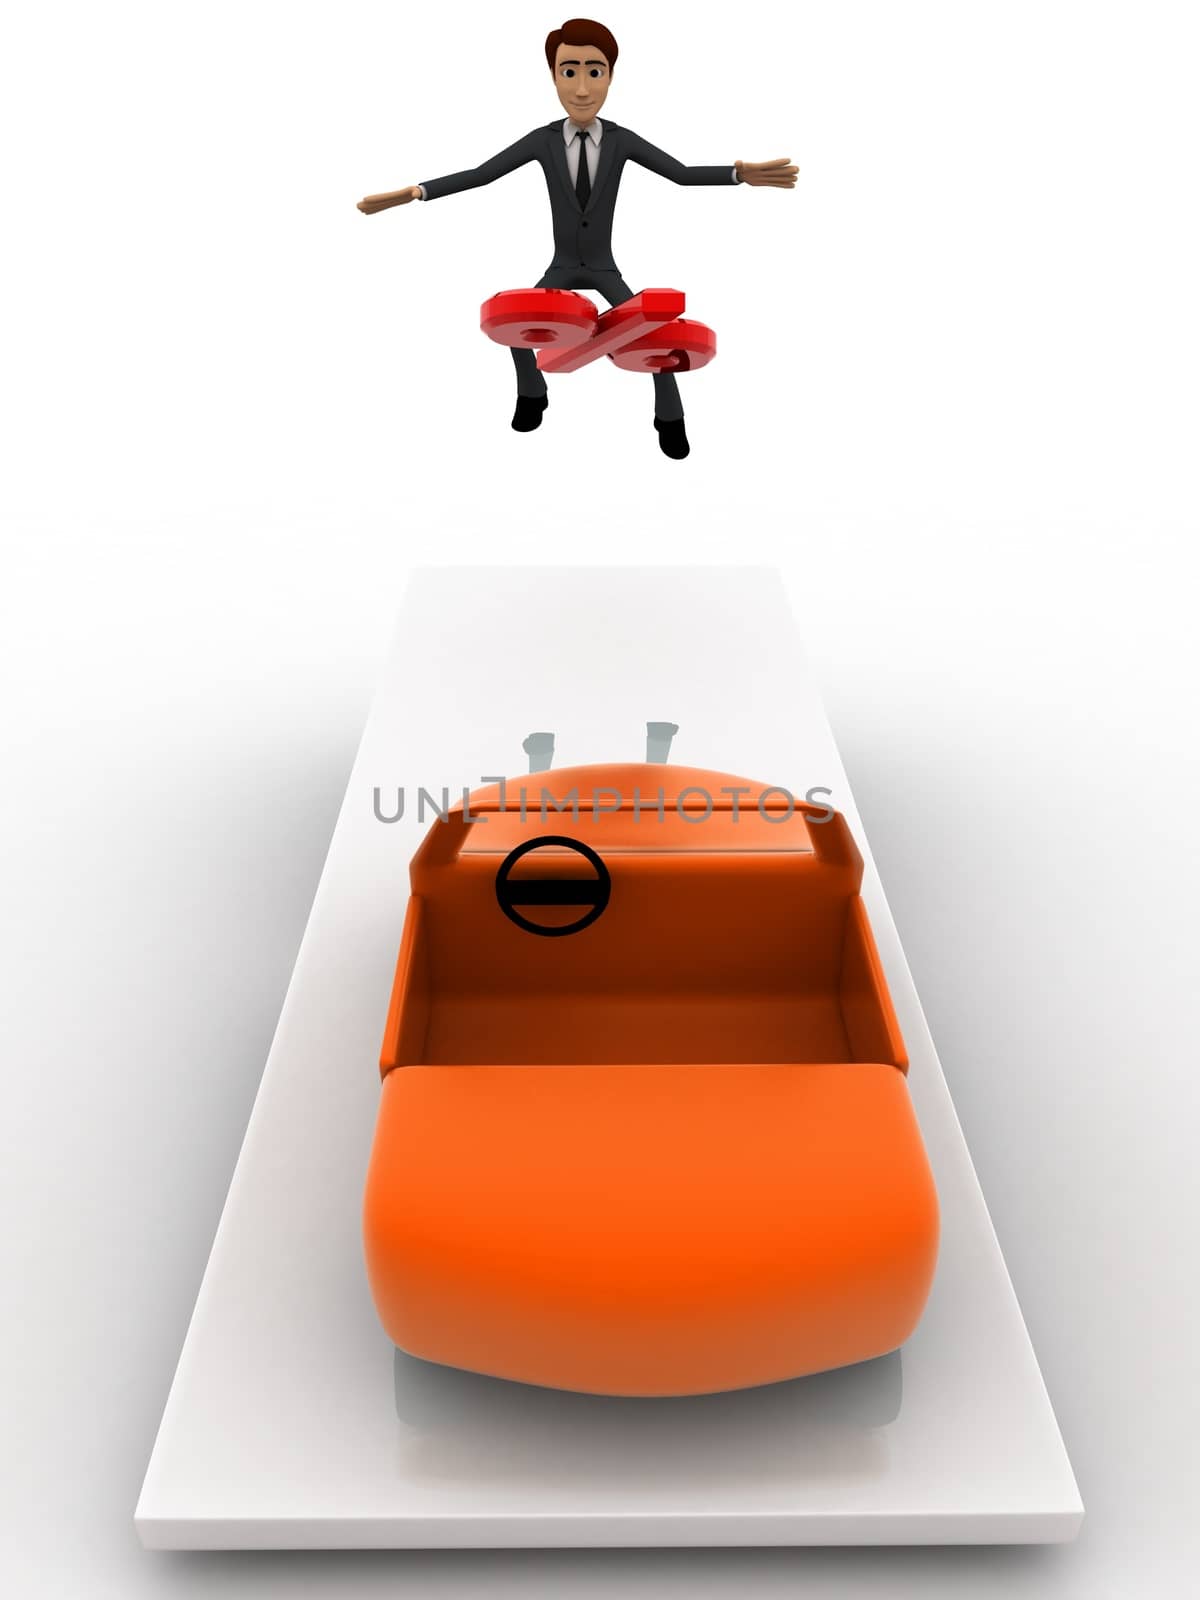 3d man jumping on seesaw with car and percentage symbol on it concept on white background, front angle view